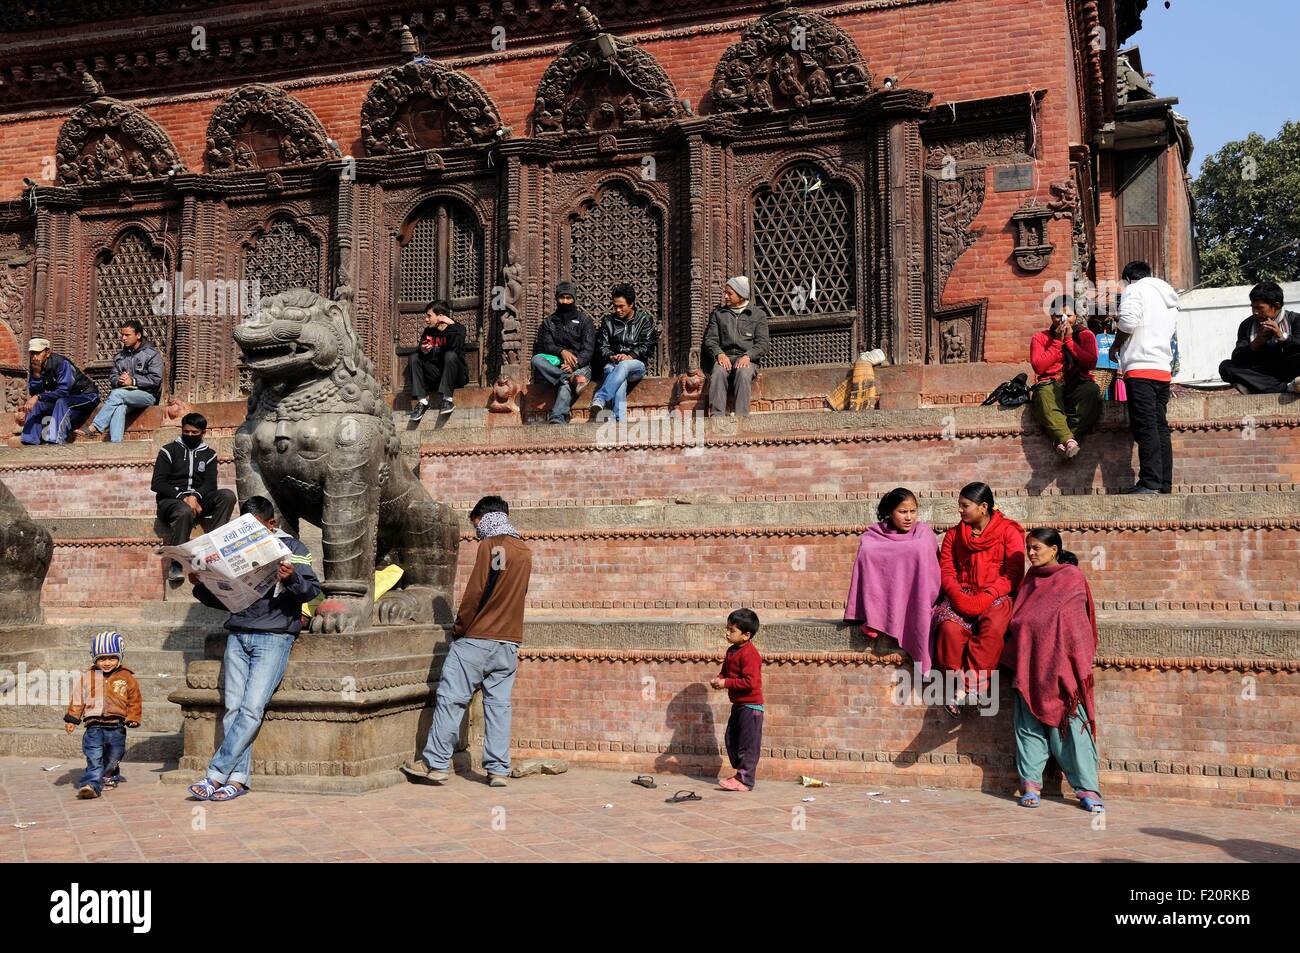 Nepal, Kathmandu valley, Kathmandu, Durbar Square listed as World Heritage by UNESCO, people seated in the morning winter sun at Durbar Square (archives) Stock Photo